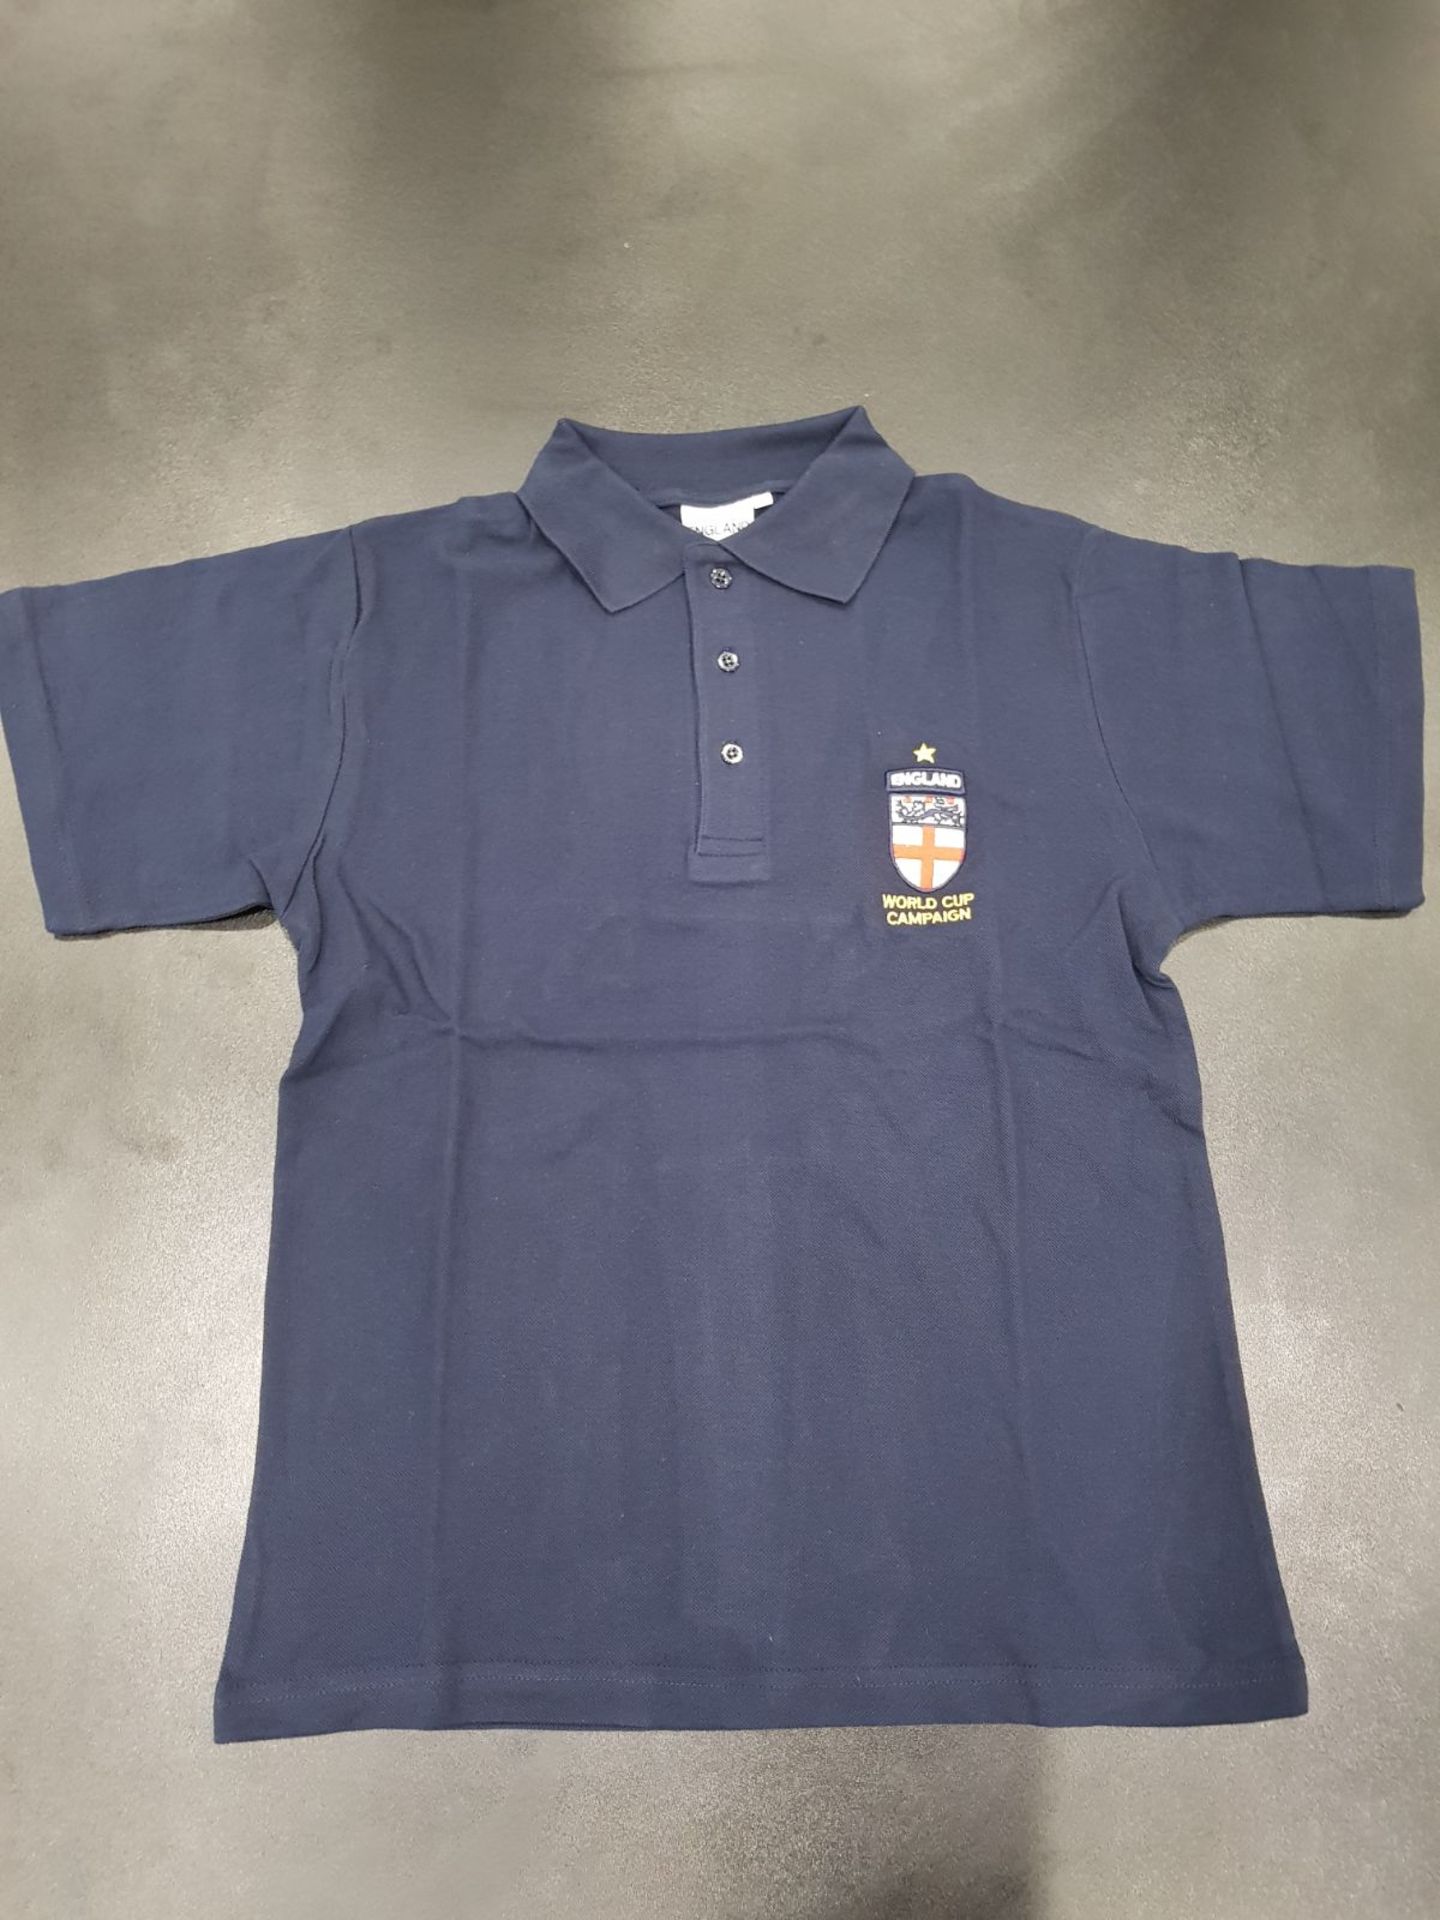 10 BRAND NEW ENGLAND WORLD CUP CAMPAIGN NAVY POLO